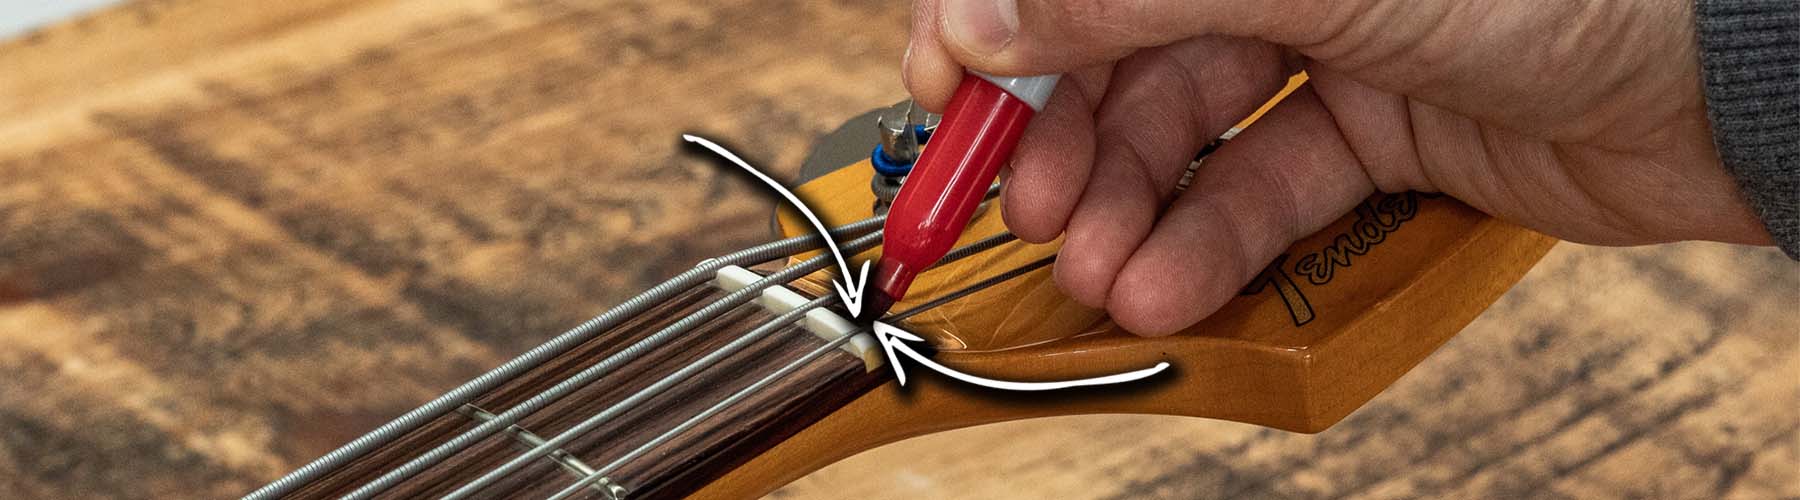 Before removing the string be sure to make a mark on the string with a permanent marker just behind the nut